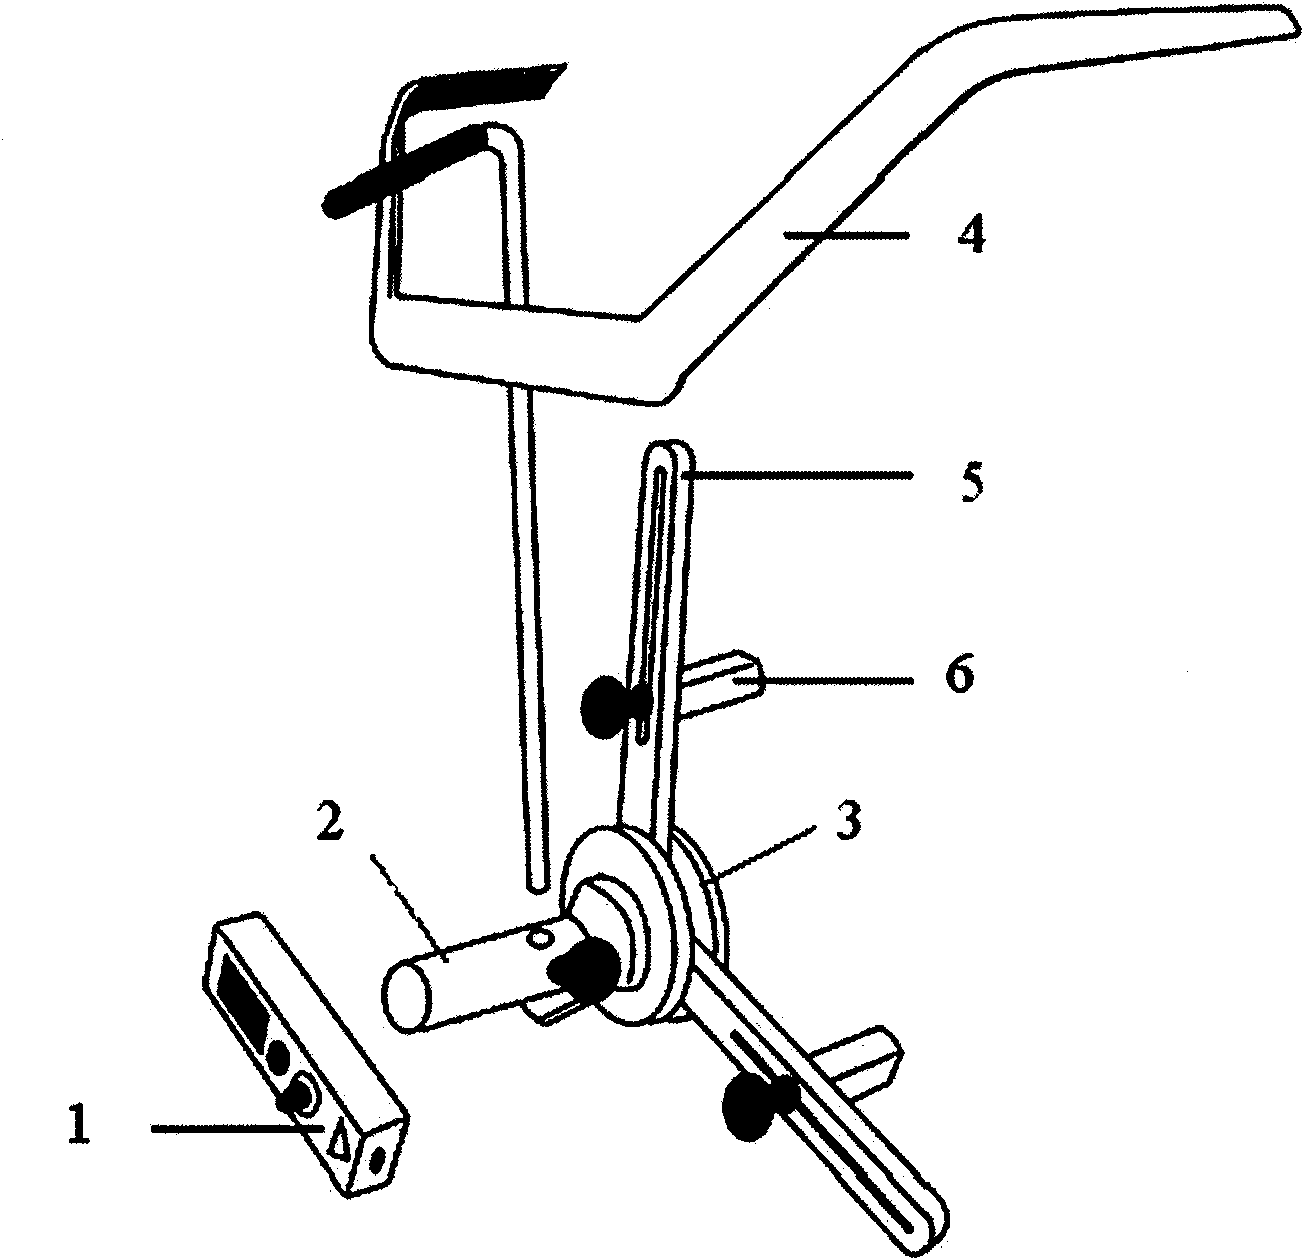 Laser measuring device for positioning wheel